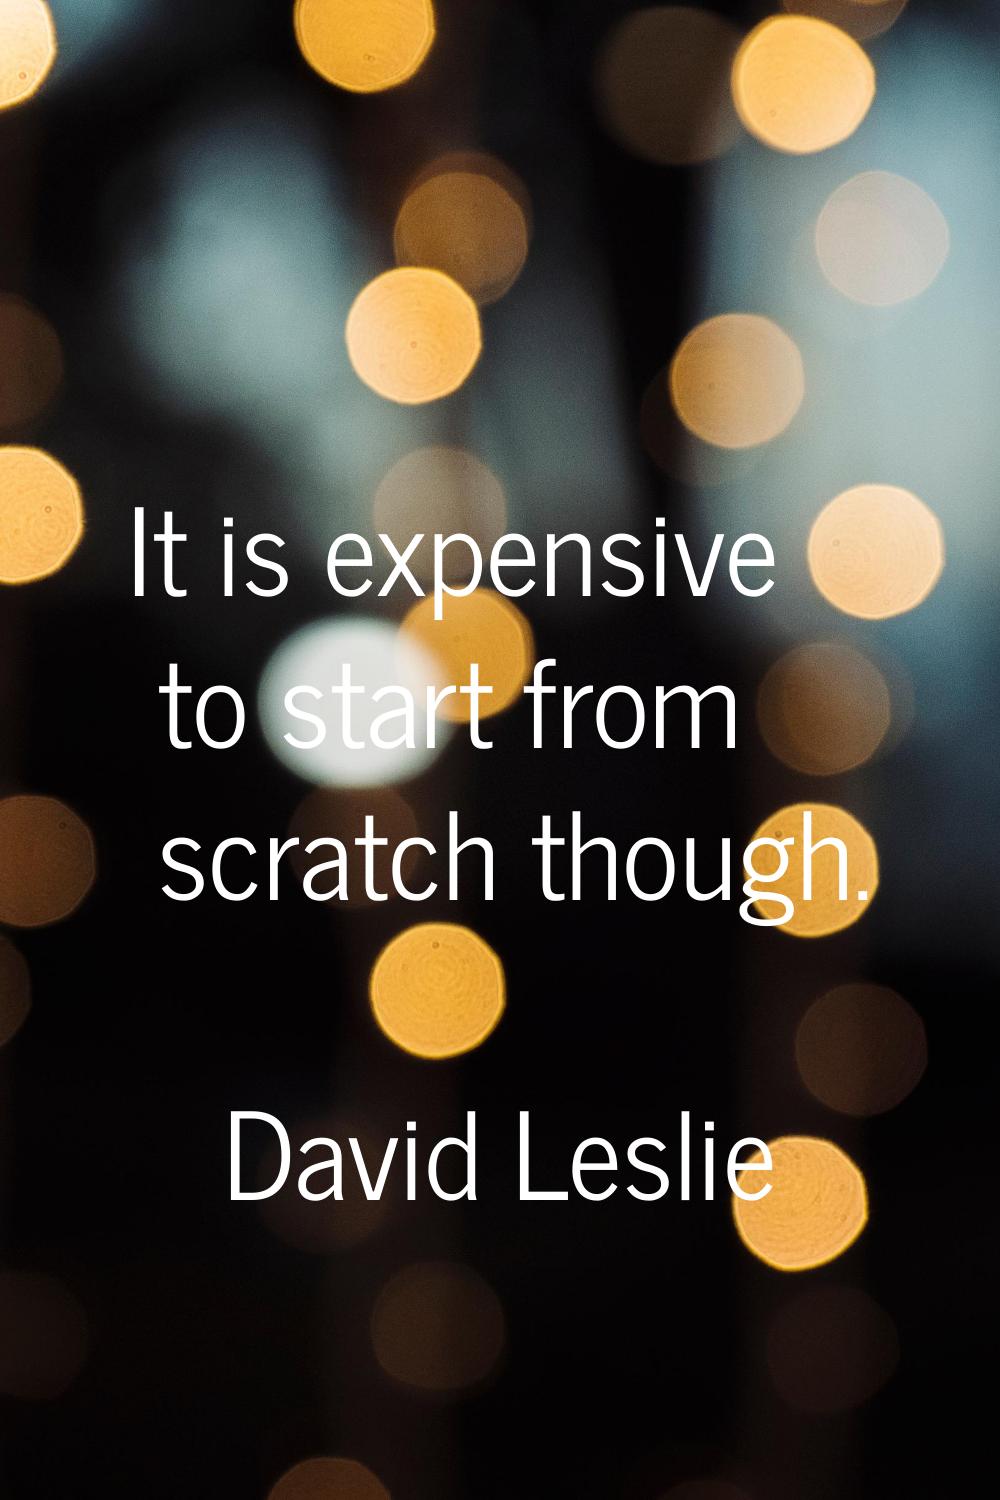 It is expensive to start from scratch though.